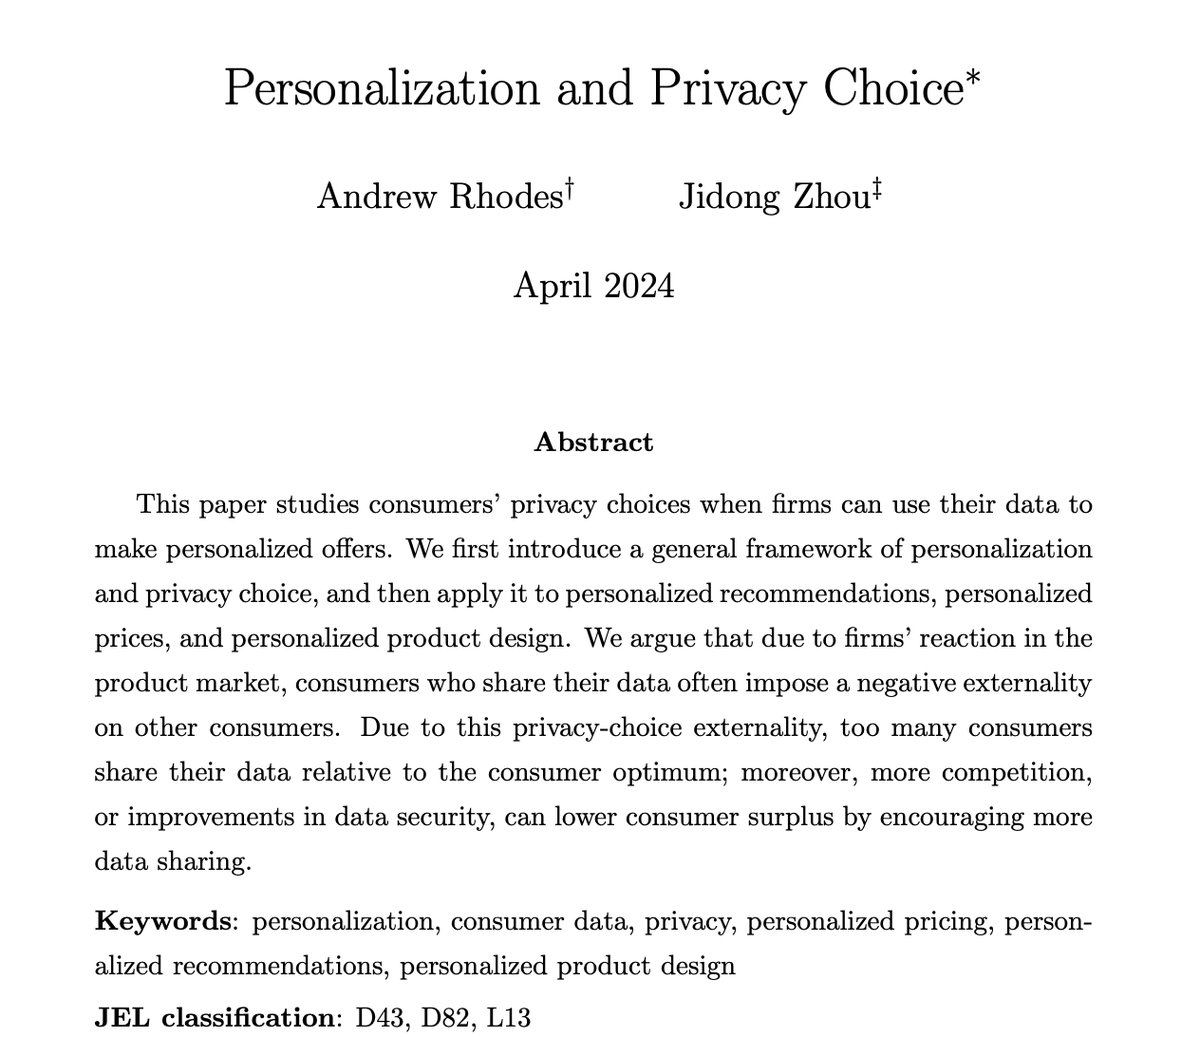 NEW Discussion Paper exploring consumers' privacy choices when firms can use their data to make personalized offers. By Andrew Rhodes & Jidong Zhou: cowles.yale.edu/research/cfdp-…